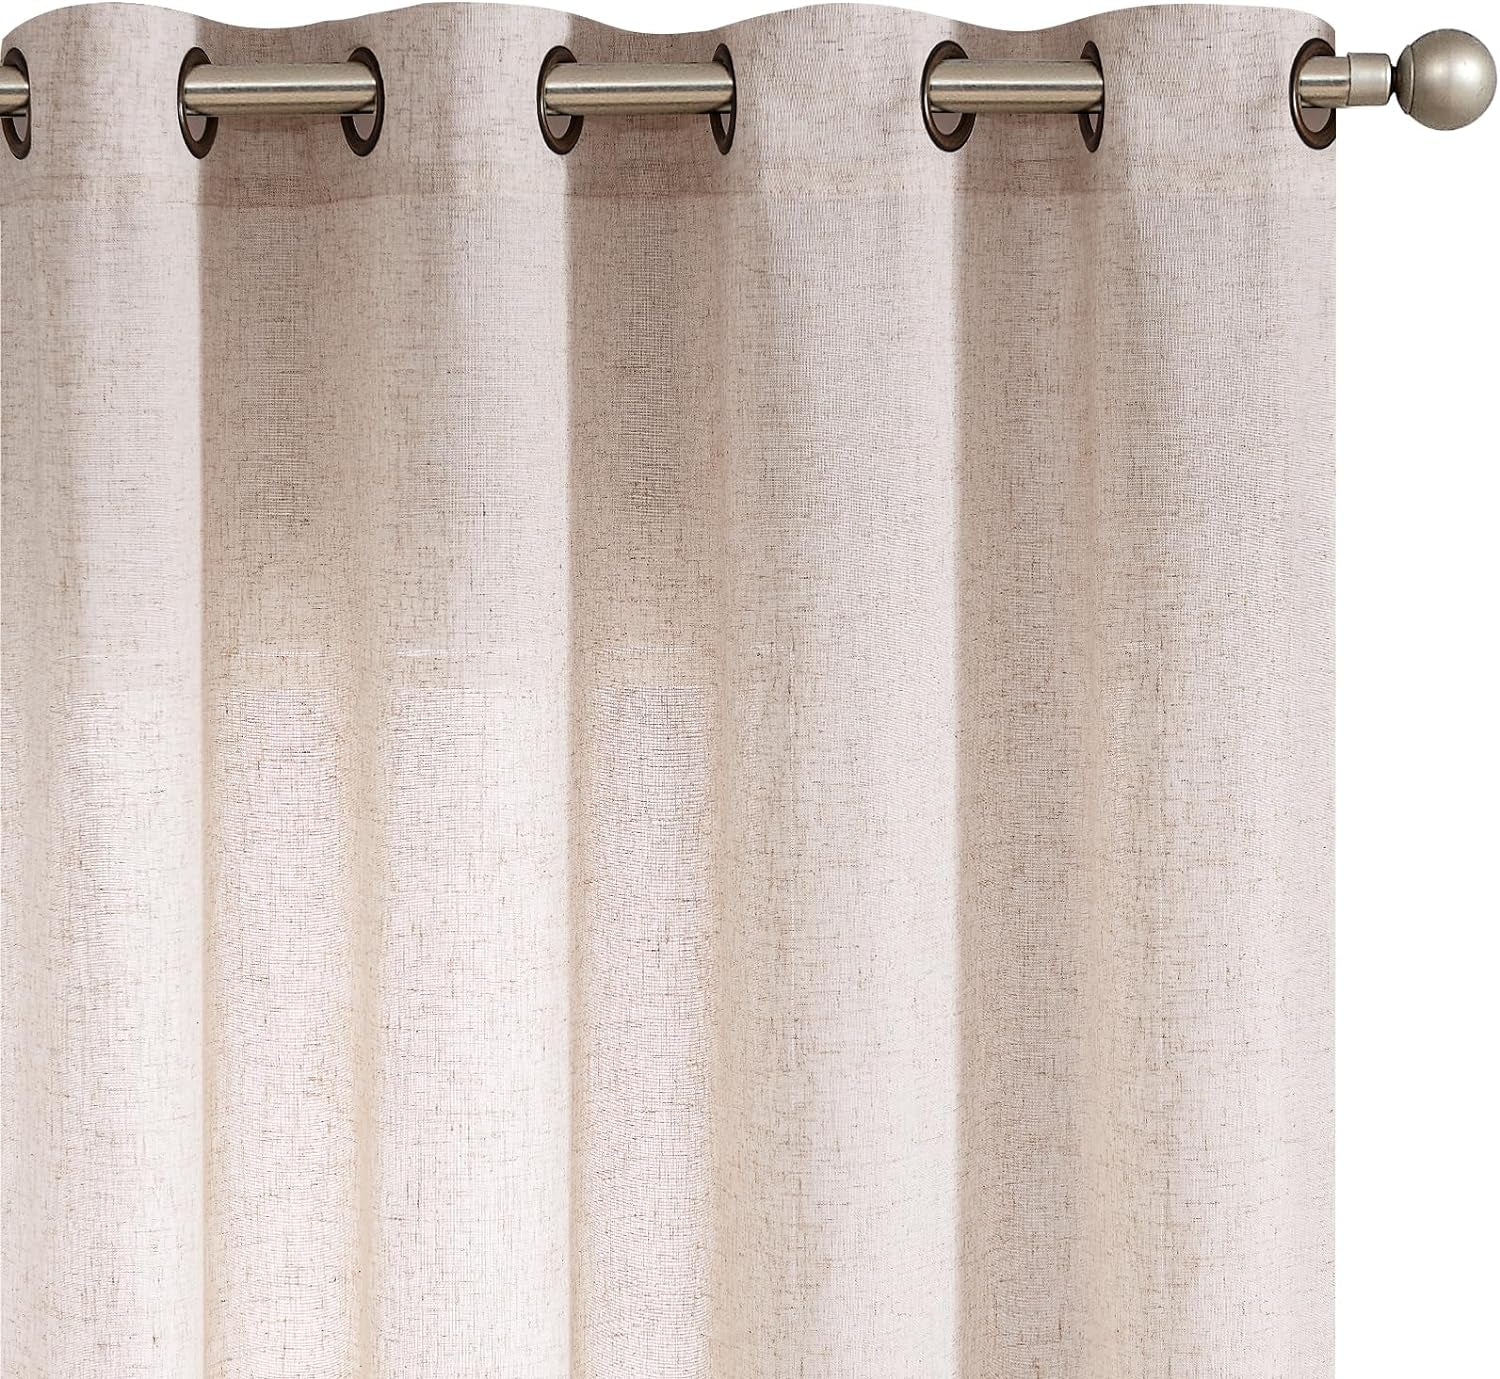 Jinchan Linen Beige Curtain 100 Inch Extra Wide for Patio Sliding Glass Door Room Divider Farmhouse Grommet Top Light Filtering Window Drape for Bedroom 100X84 Crude 1 Panel  CKNY HOME FASHION *Tan W50 X L63 